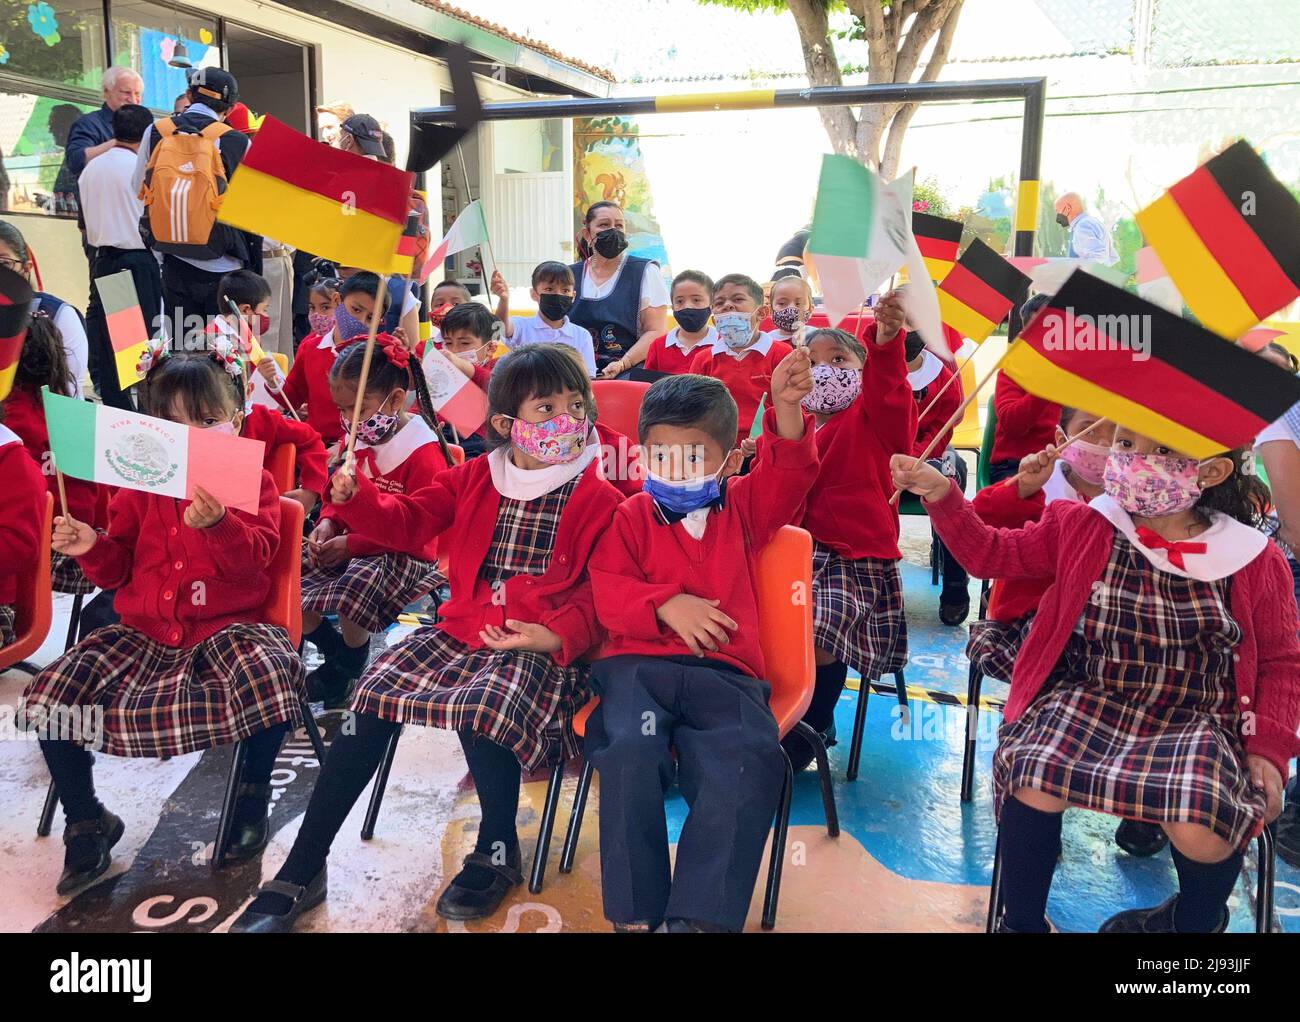 Queretaro, Mexico. 20th May, 2022. Children from the Casa de Cuna orphanage in Queretaro wave German and Mexican flags. The then DFB treasurer and later president Egidius Braun had visited the orphanage in 1986 and was moved by the misery there. Together with the national players Völler and Toni Schumacher as well as team manager Franz Beckenbauer, he returned and eventually founded the "Mexico Aid", which is now called the "Egidius Braun Foundation". (to dpa: "Moved Völler visits orphanage in Mexico: "Braun would be proud"") Credit: Holger Schmidt/dpa/Alamy Live News Stock Photo